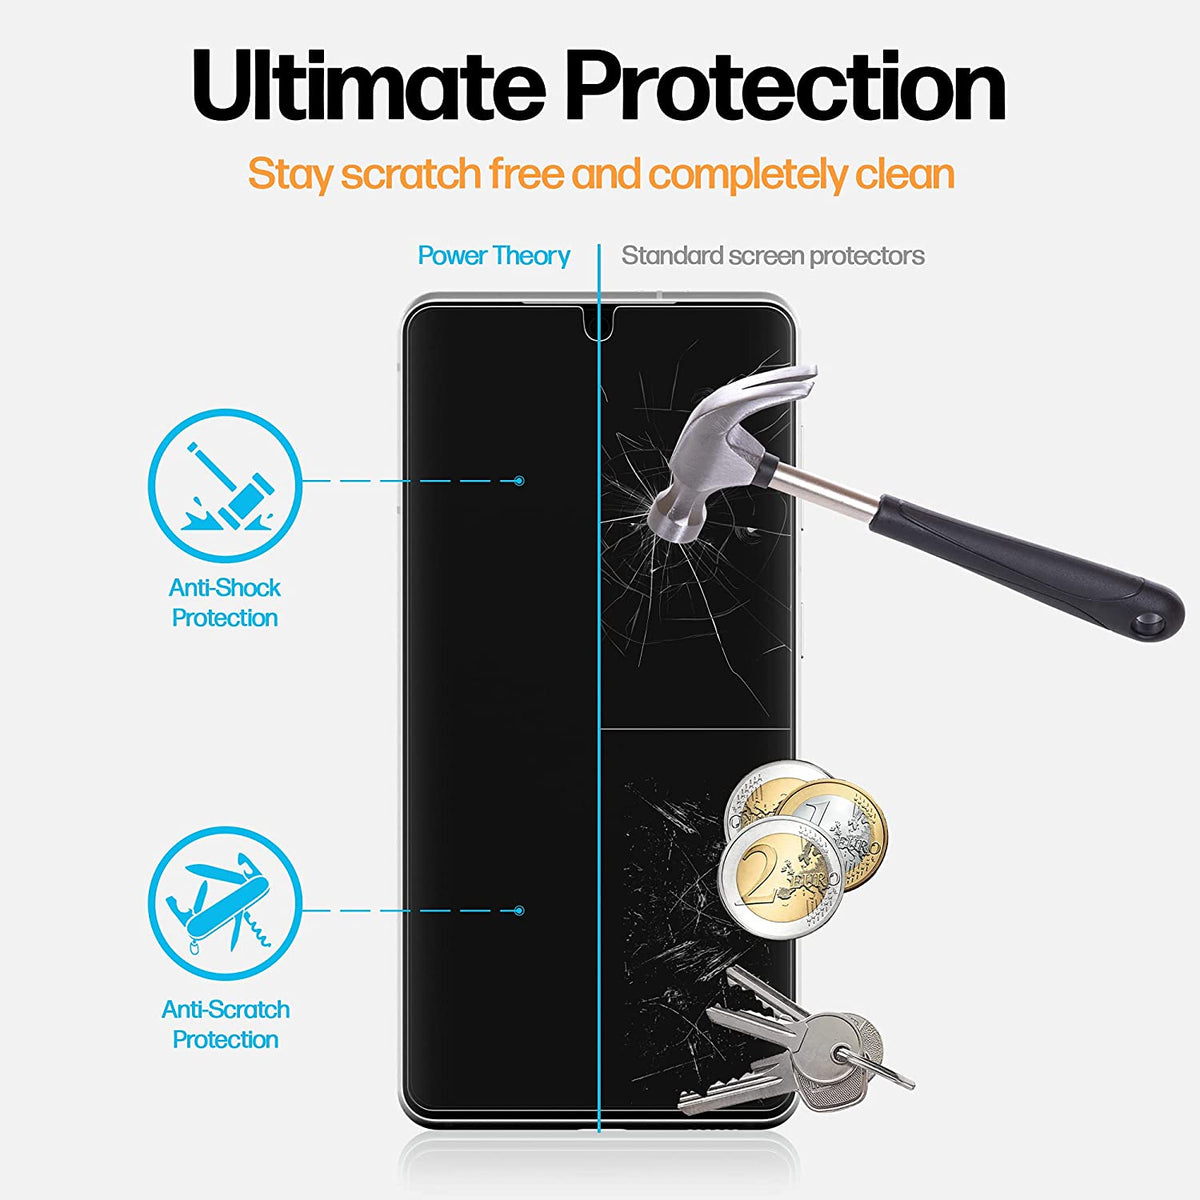 Samsung Galaxy S21 5G Tempered Glass Screen Protector [2-Pack] Cover